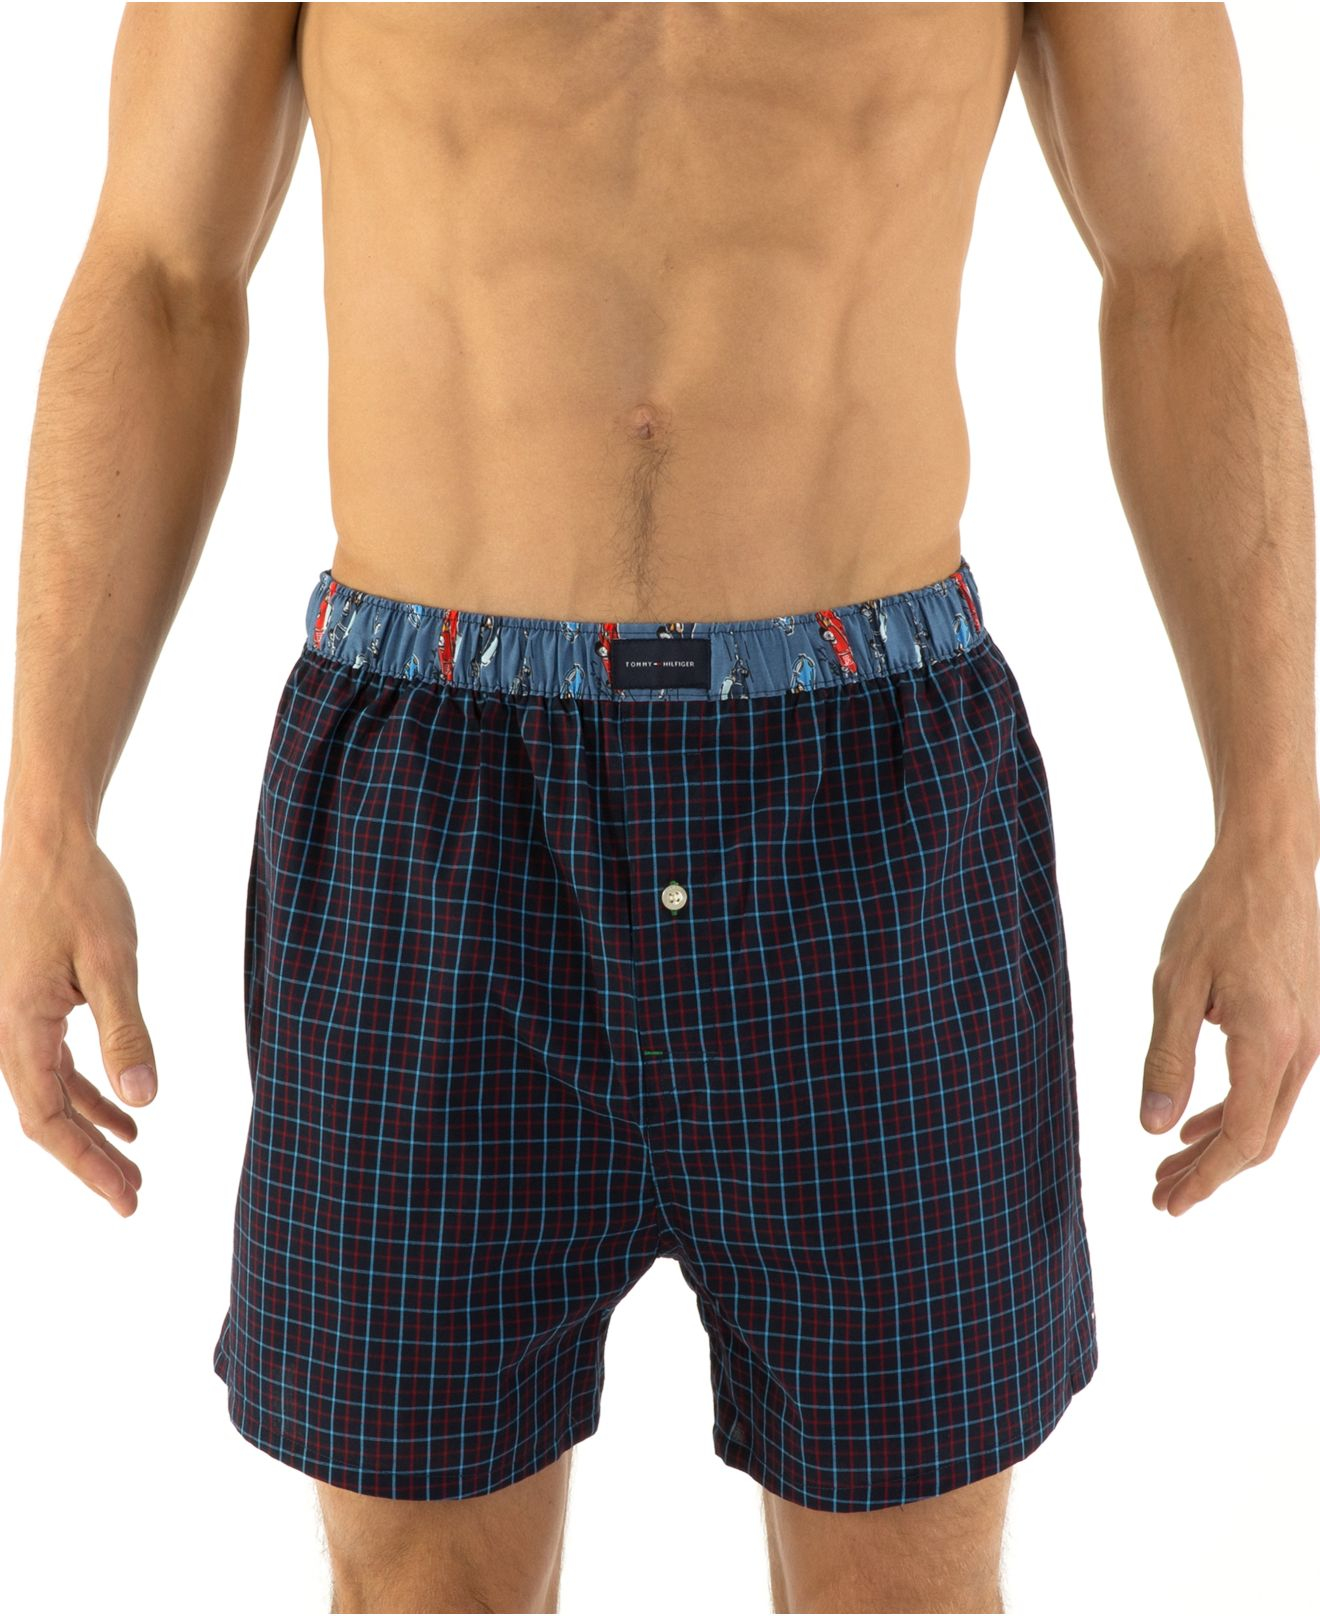 Lyst - Tommy Hilfiger Men's Navy Grid Woven Boxers in Blue for Men